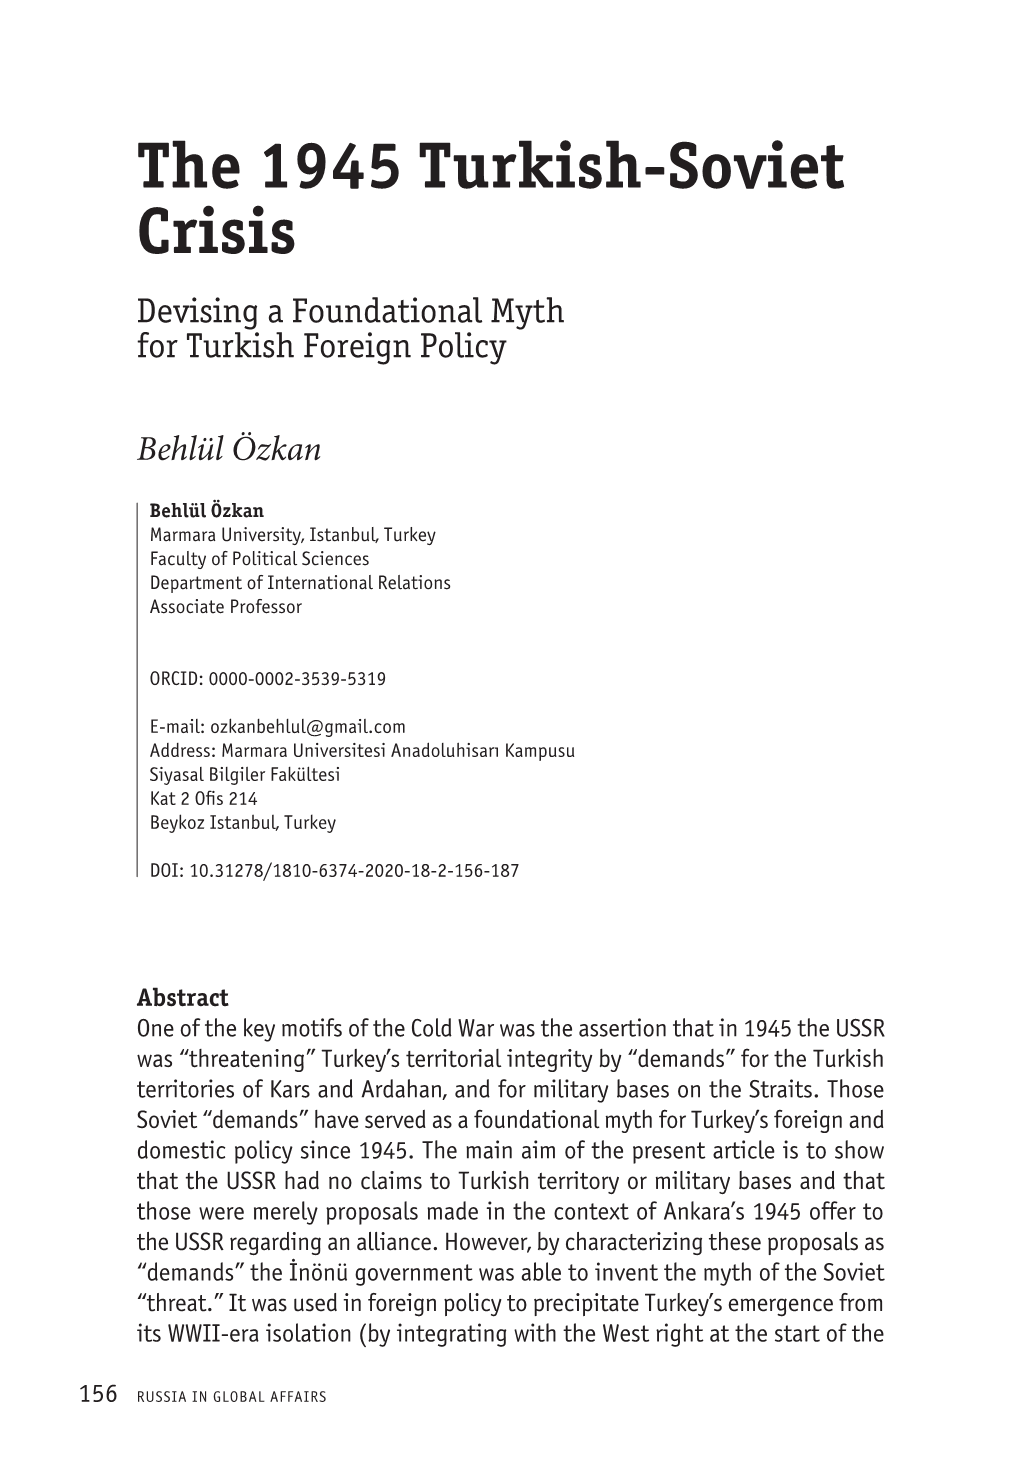 The 1945 Turkish-Soviet Crisis Devising a Foundational Myth for Turkish Foreign Policy